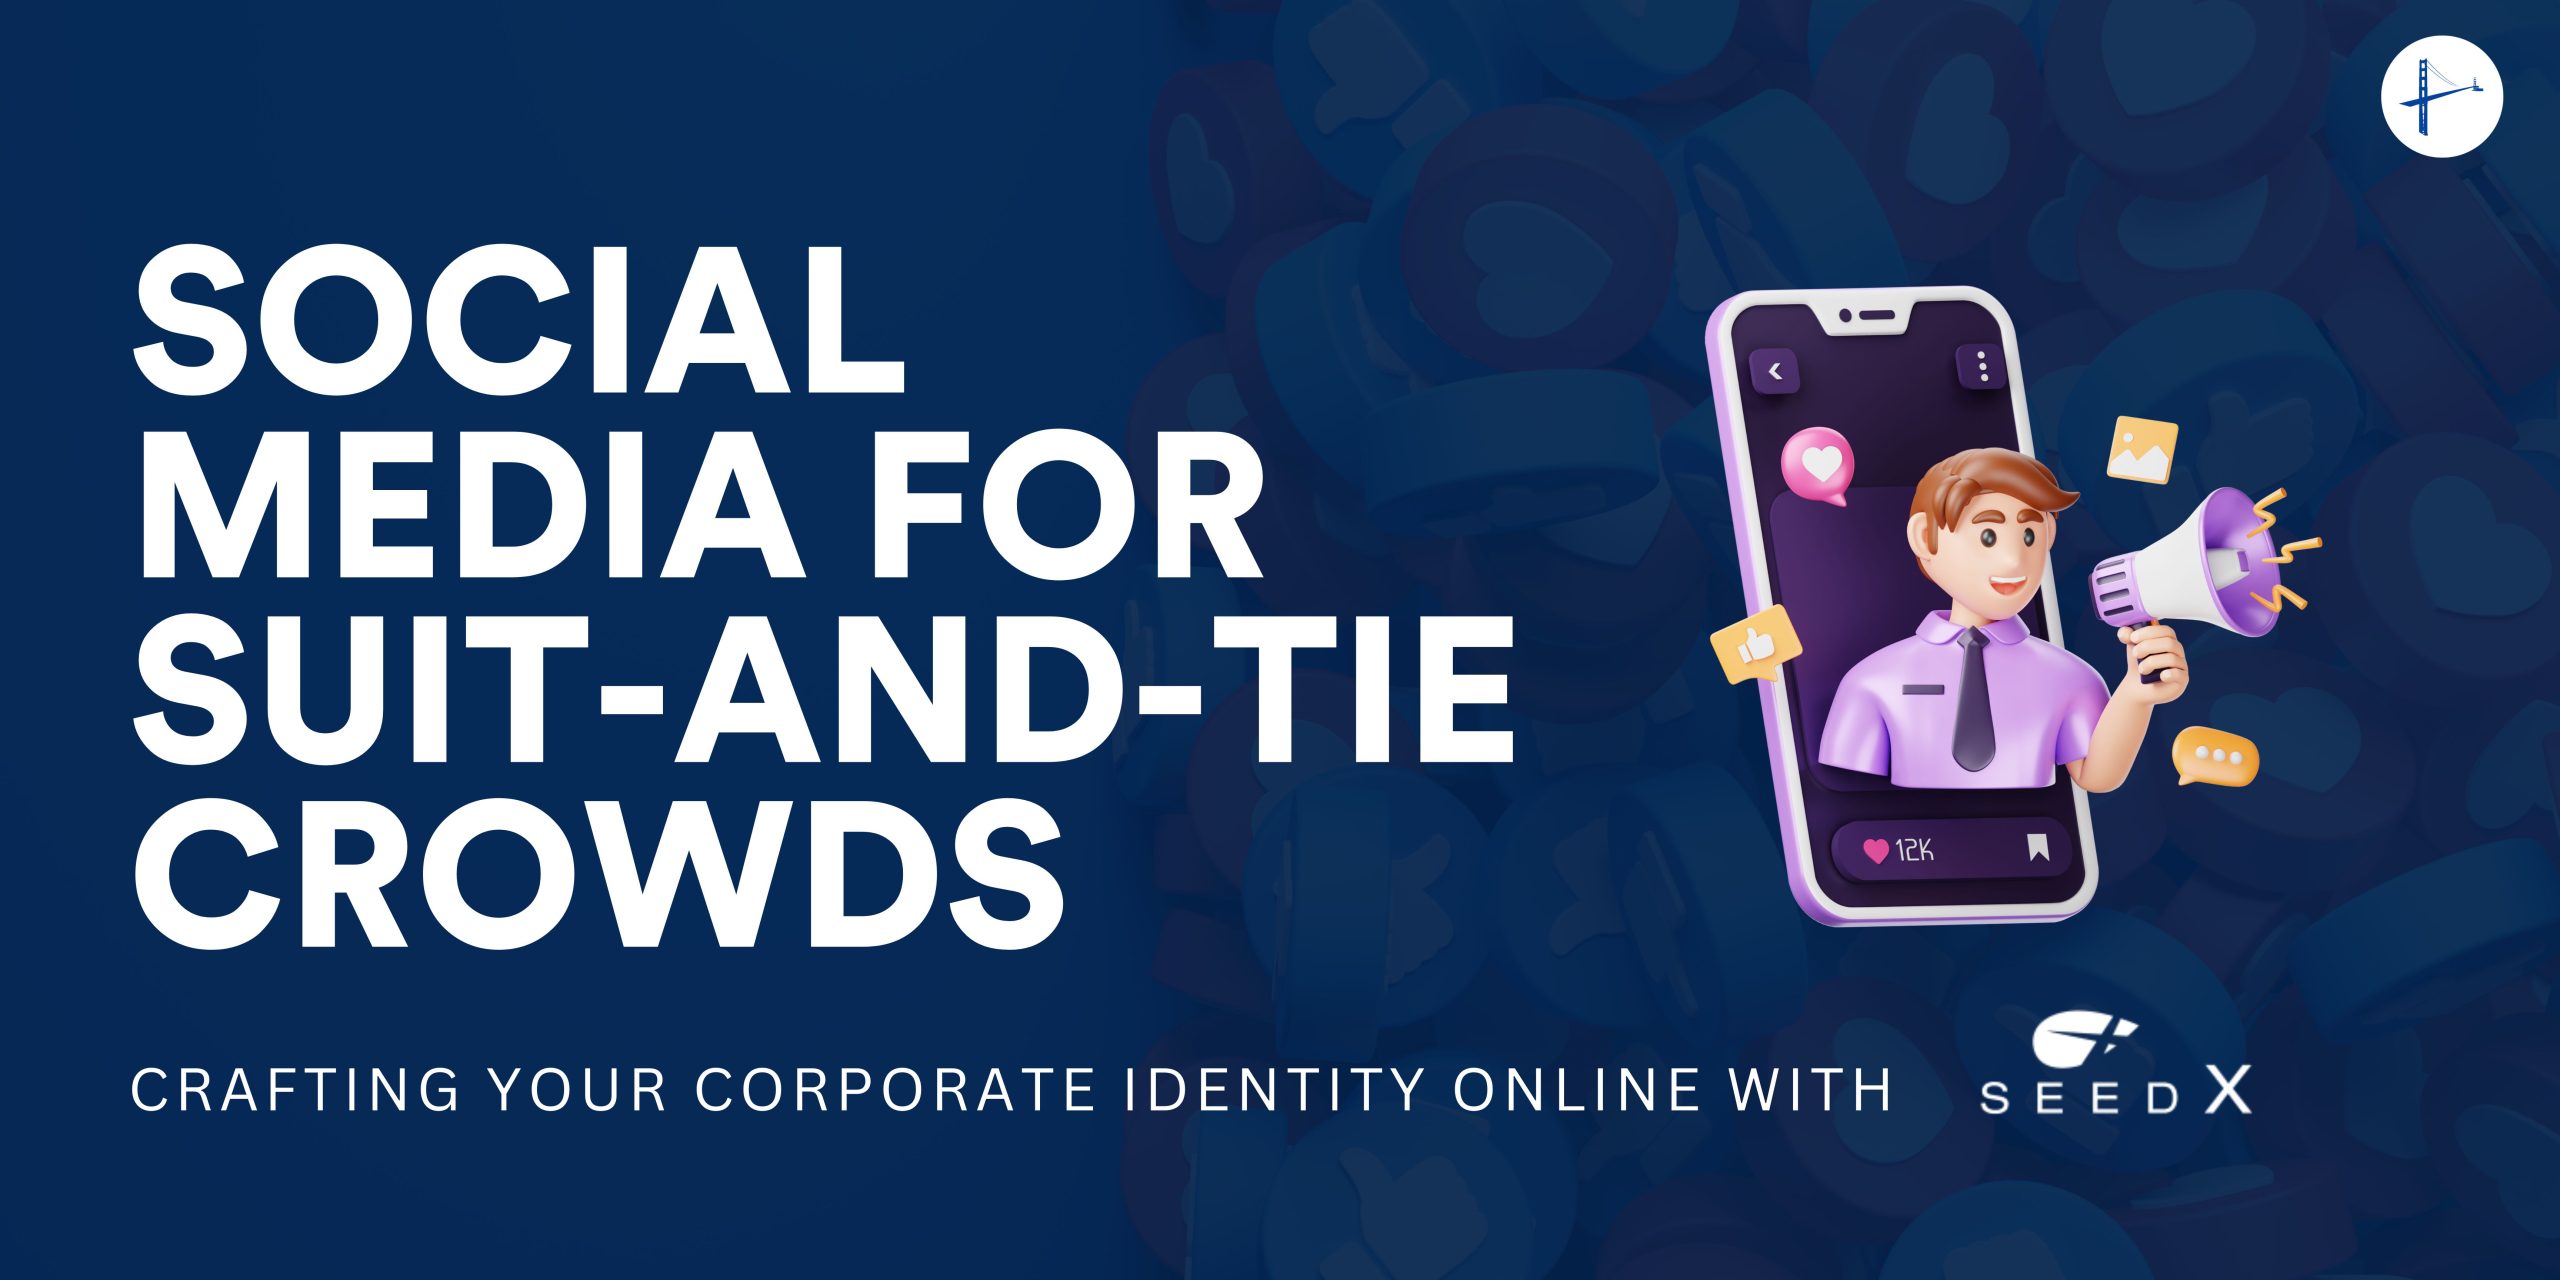 Social Media for Suit-and-Tie Crowds: Crafting Your Corporate Identity Online with SeedX